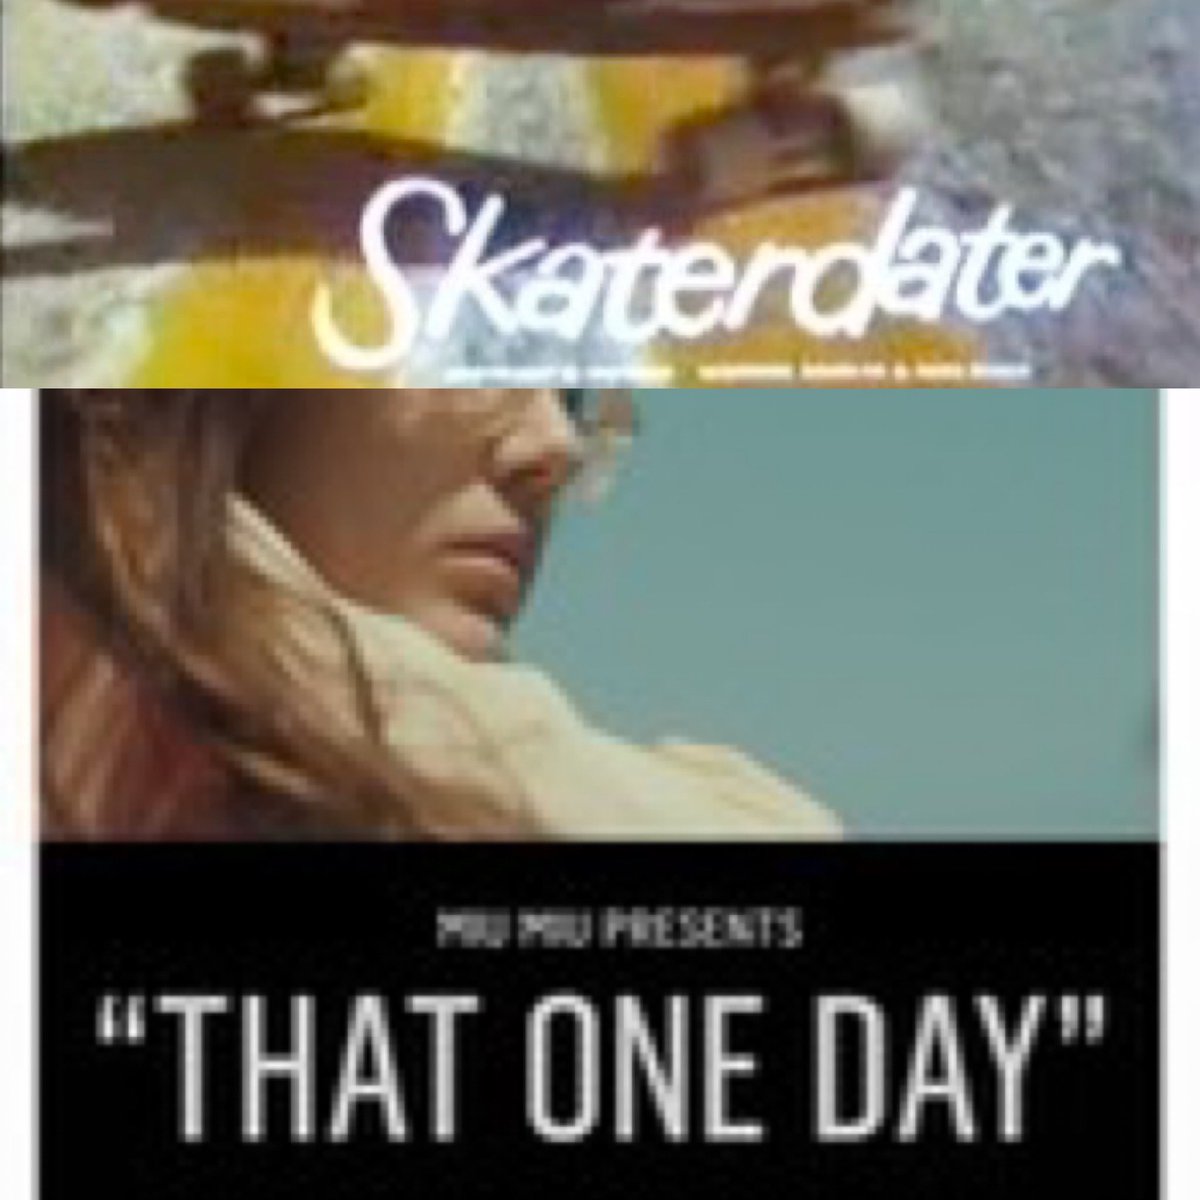 For those who missed this evening’s meeting here is what we did: We watched #Skaterdater & #ThatOneDay  by @CrystalMoselle along with few other shorts picked by our members. We also went over our basic plans for semester that include filmmaking workshops after spring break.
#uncc